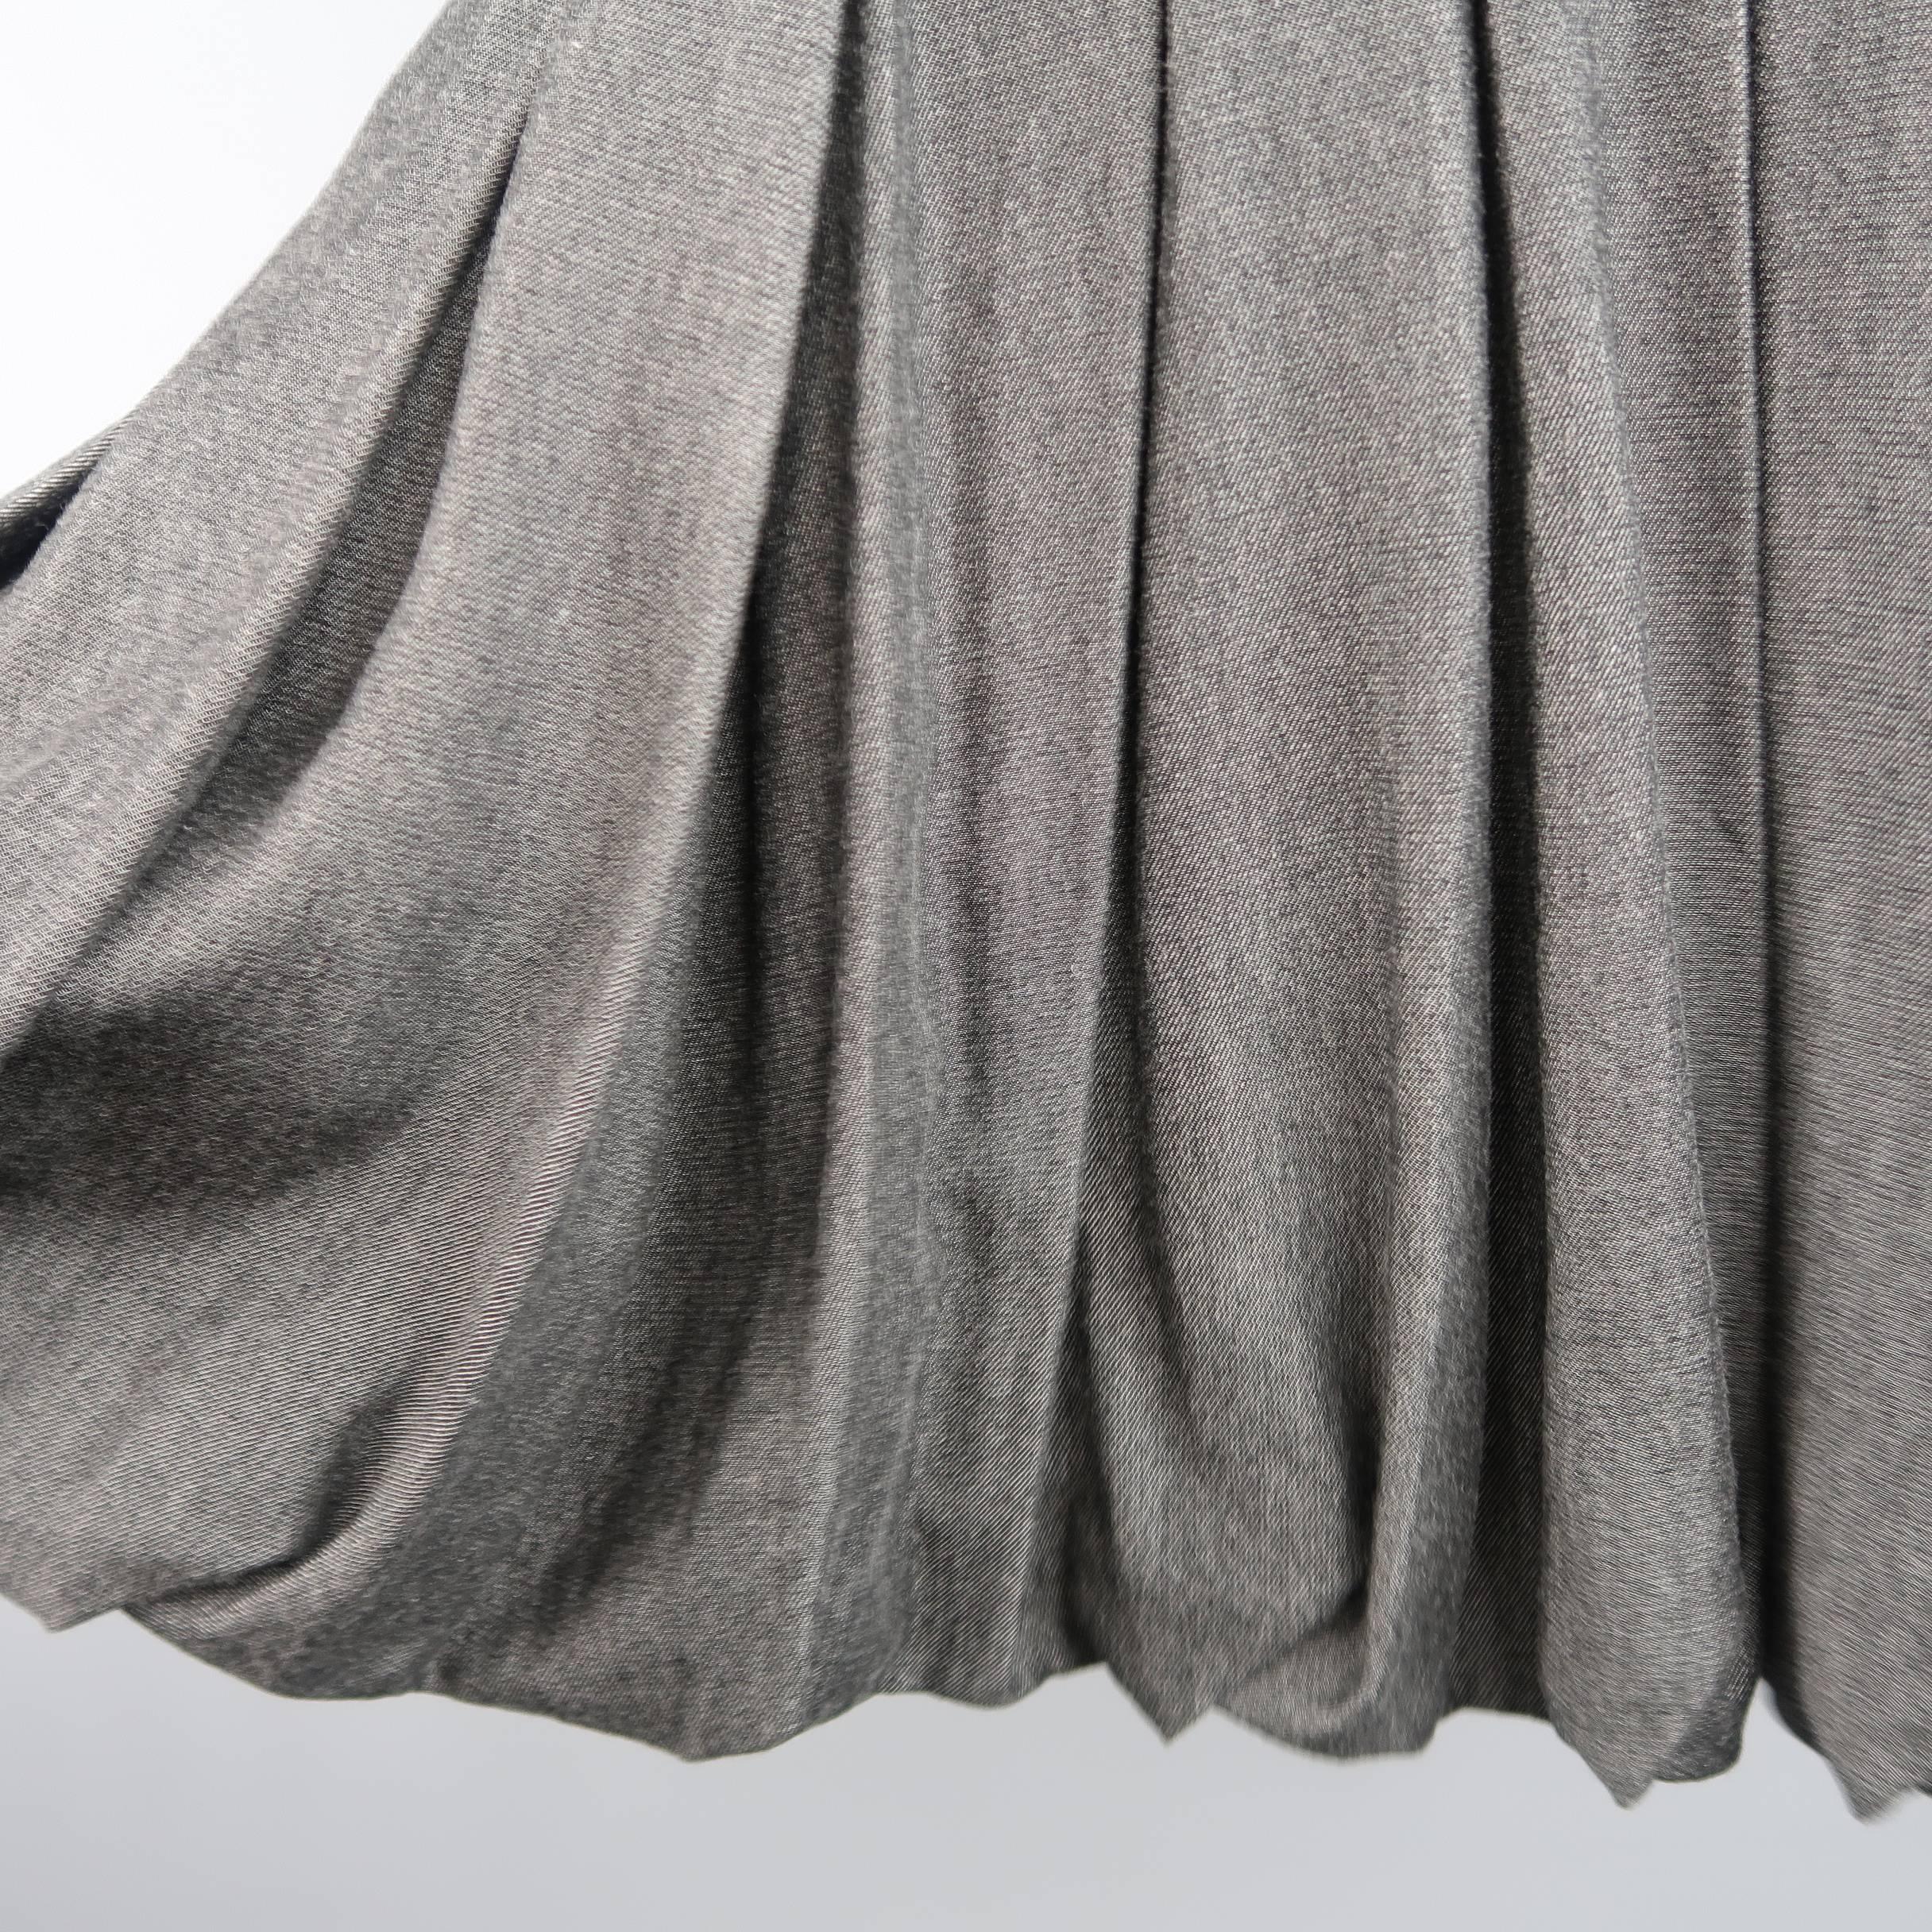 AKRIS A line skirt comes in gray bamboo fabric and features a box pleated construction, black waistband, and gathered bubble hemline. Made in Switzerland.
 
Excellent Pre-Owned Condition.
Marked: 4
 
Measurements:
 
Waist: 28 in.
Hip: 40 in.
Length: